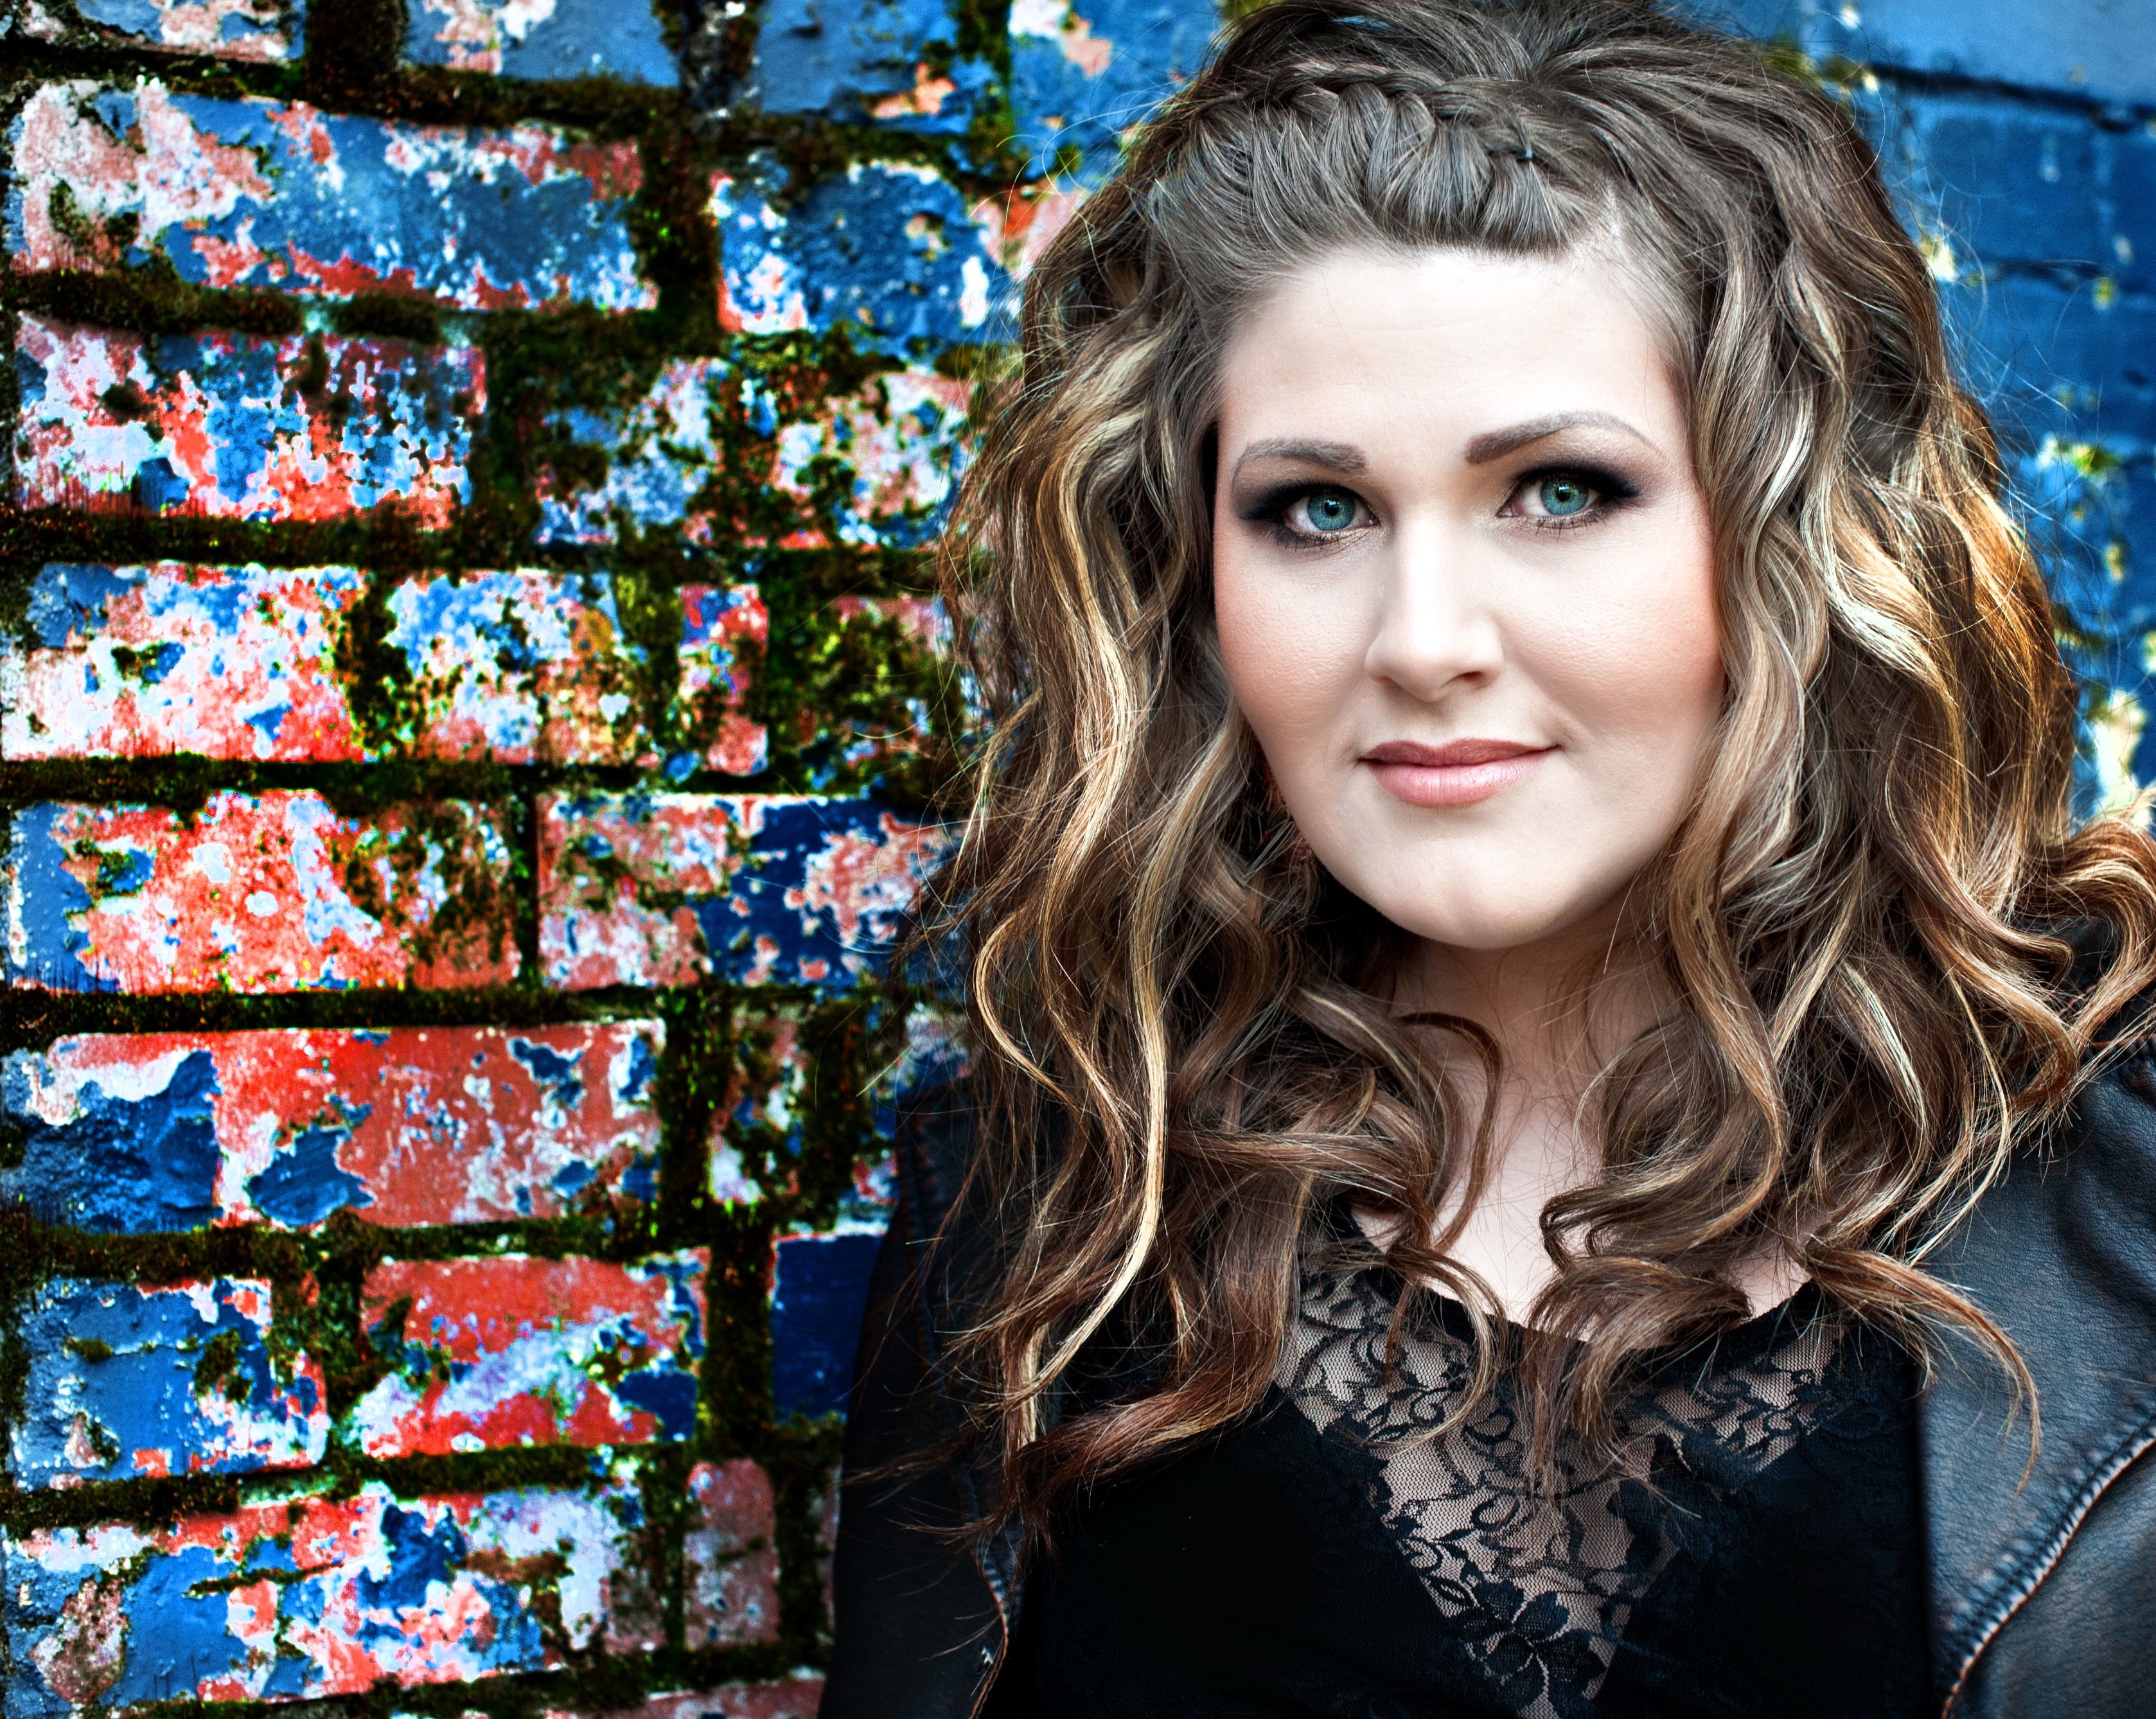 SKY’S THE LIMIT- Local singer Randi Boulton performs at the Red Deer College Arts Centre on Oct. 20.